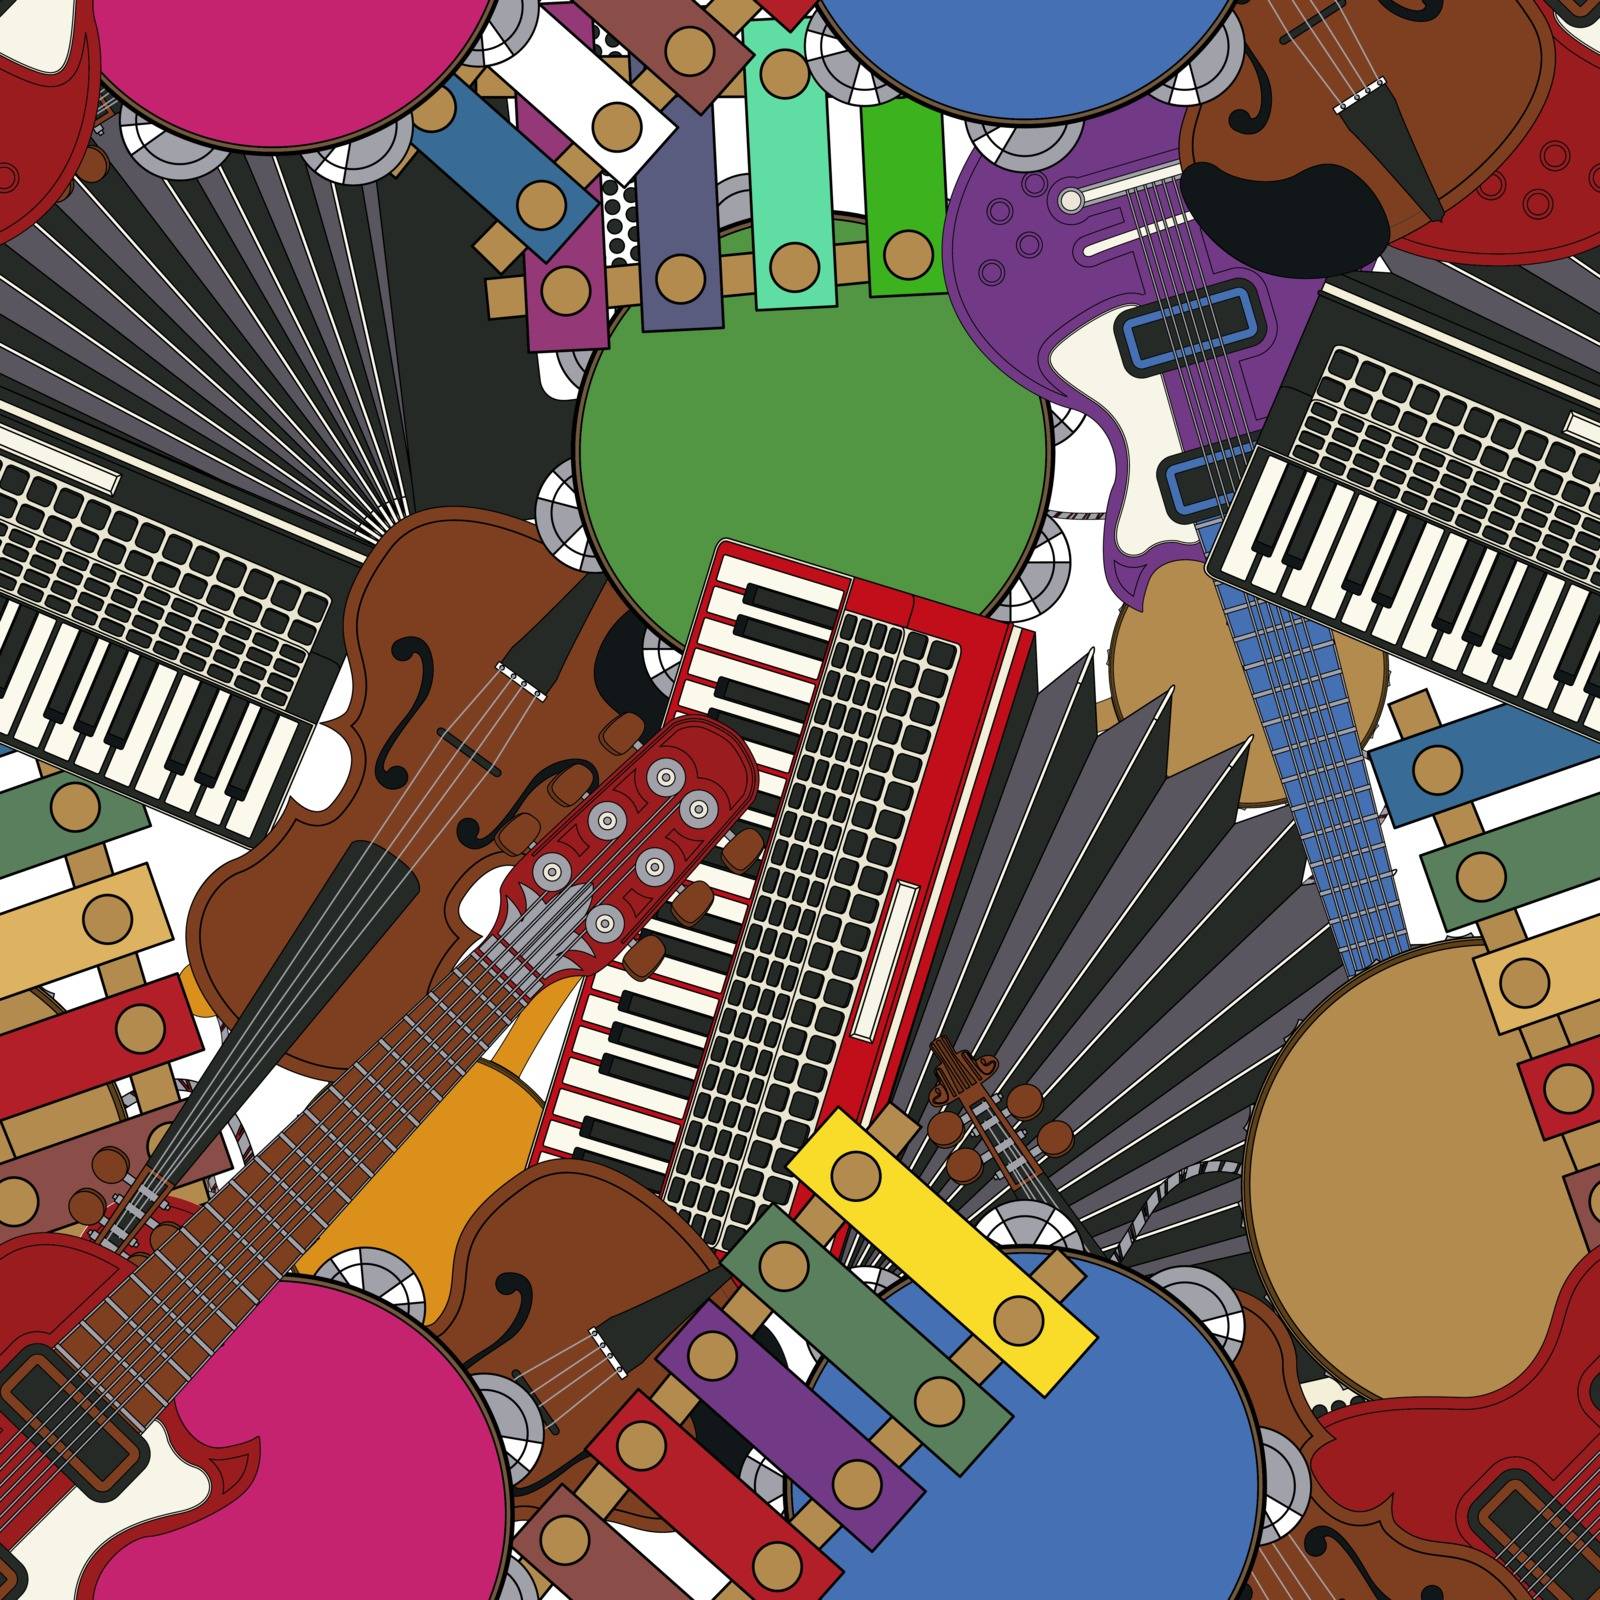 Musical instruments tile by Lirch